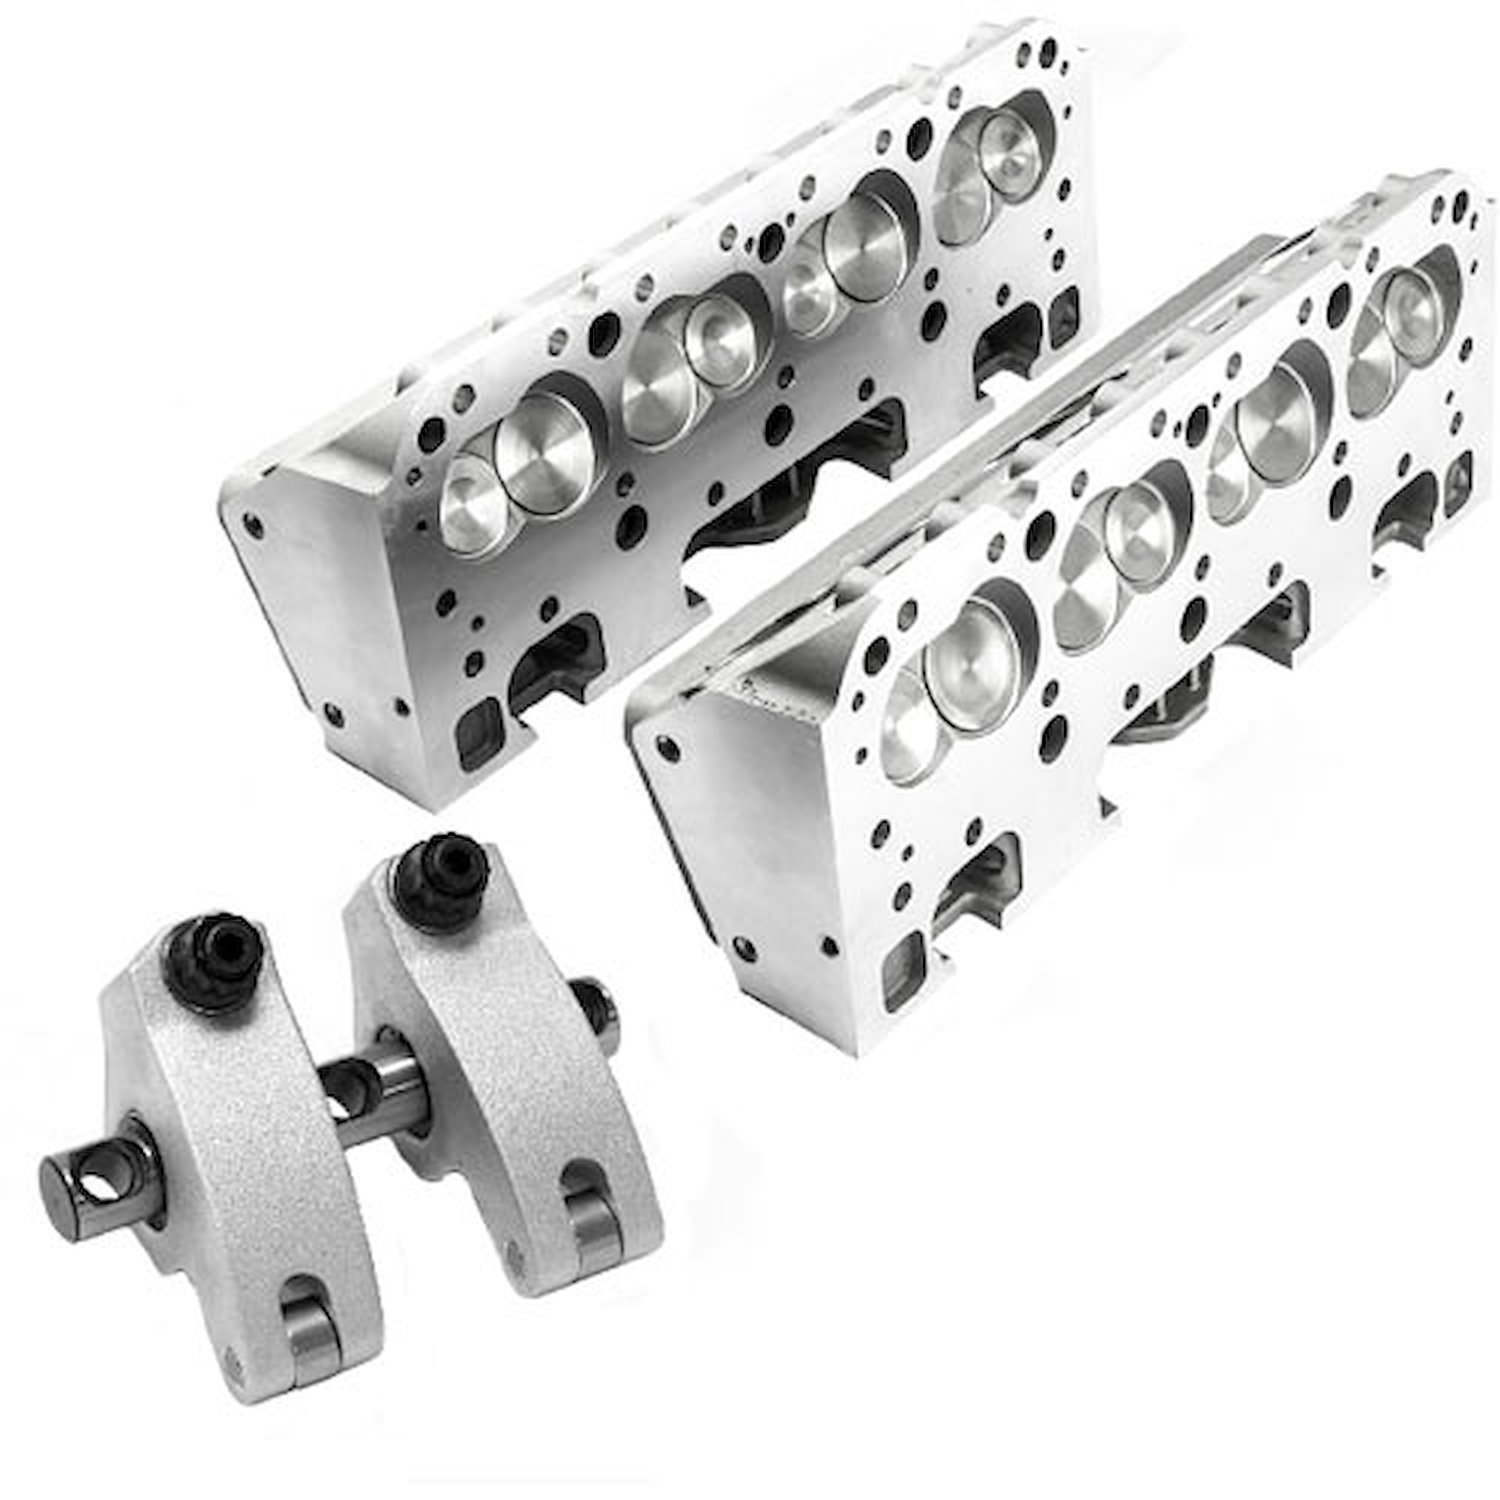 Chevy SB 350 JESEL Solid Roller Race Package - 190cc Aluminium Cylinder Heads